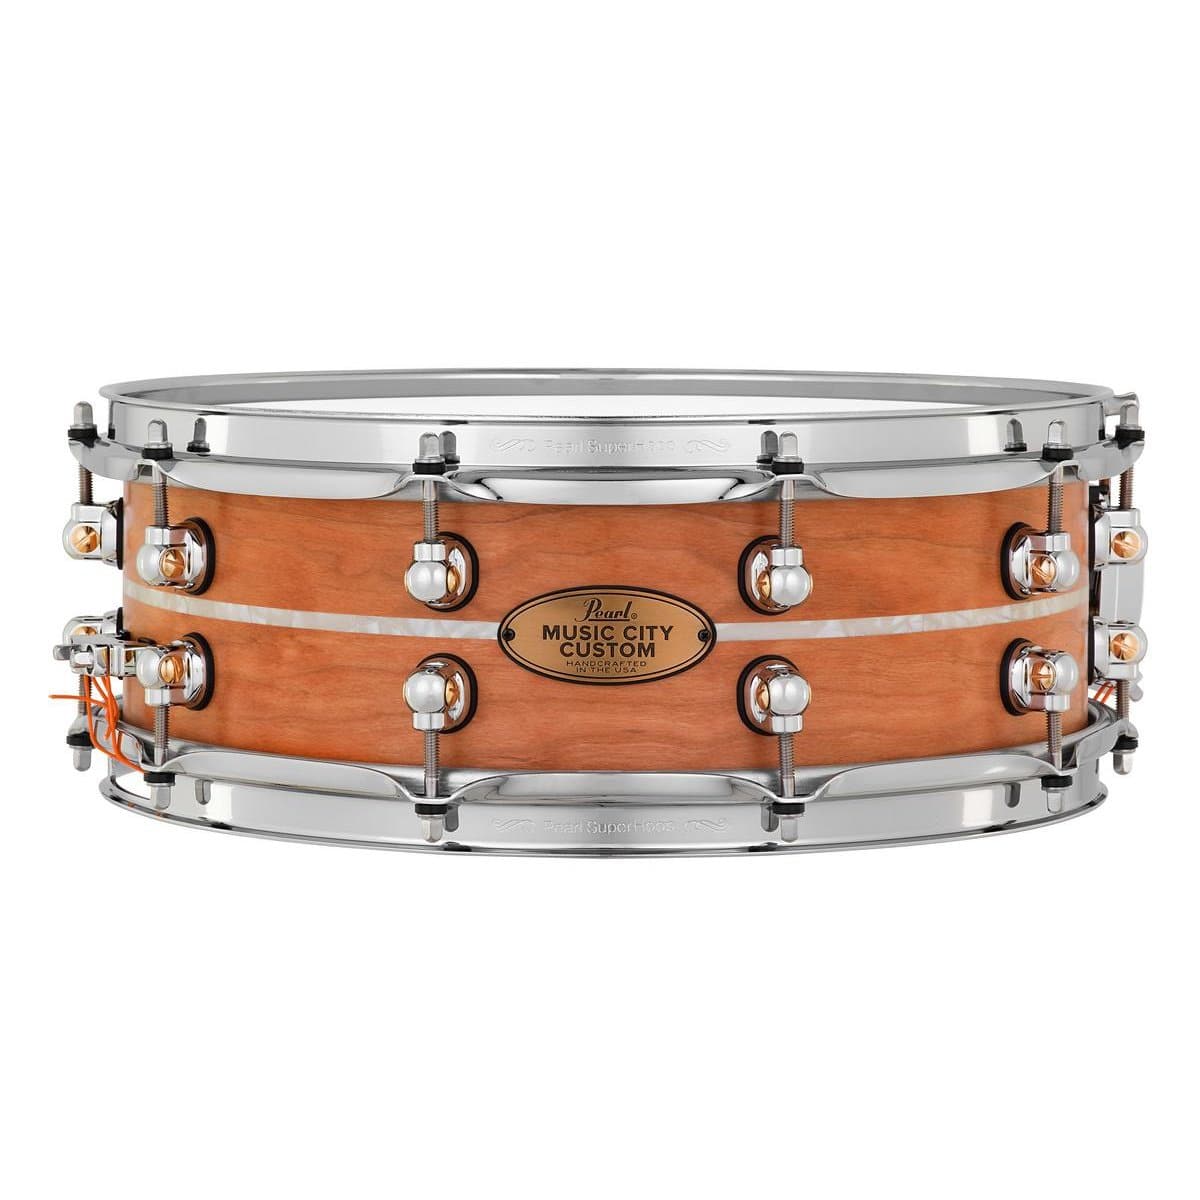 Pearl Music City Custom Solid Cherry 14x5 Snare Drum - Natural With Marine Pearl Inlay